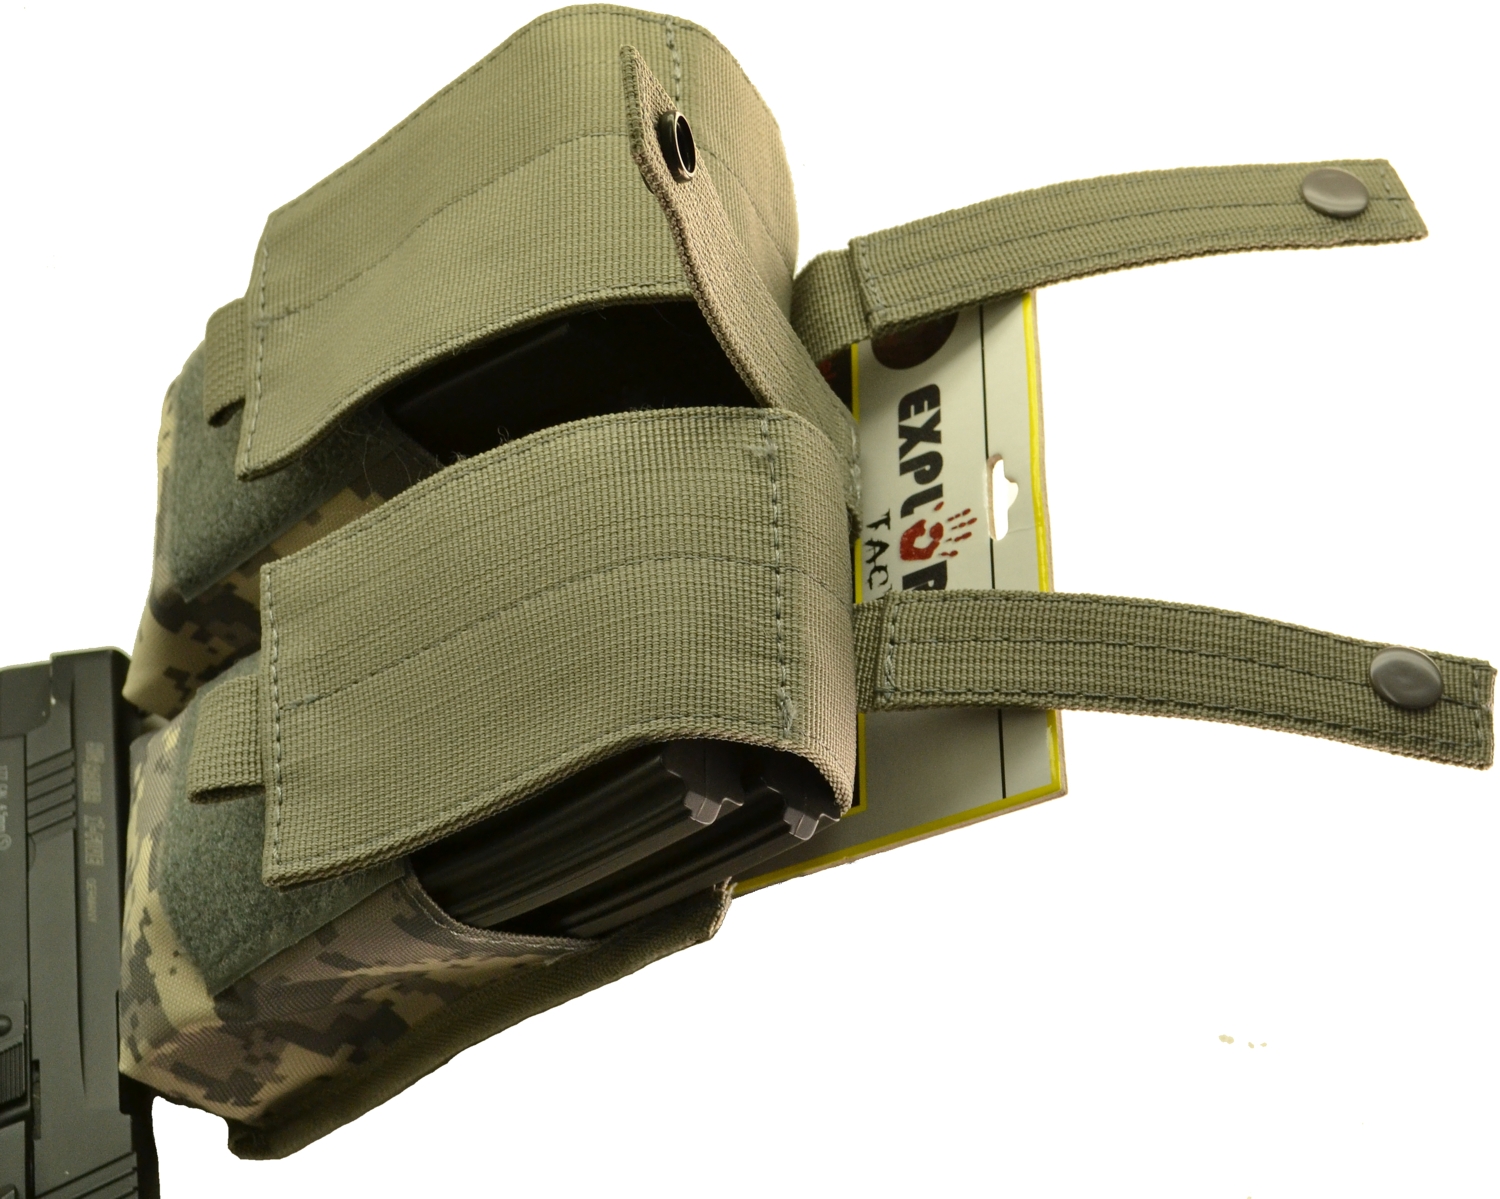 P12 P52 Double AR Mag Pouch Black, ACU Tan, OD Mc Adjustable in size